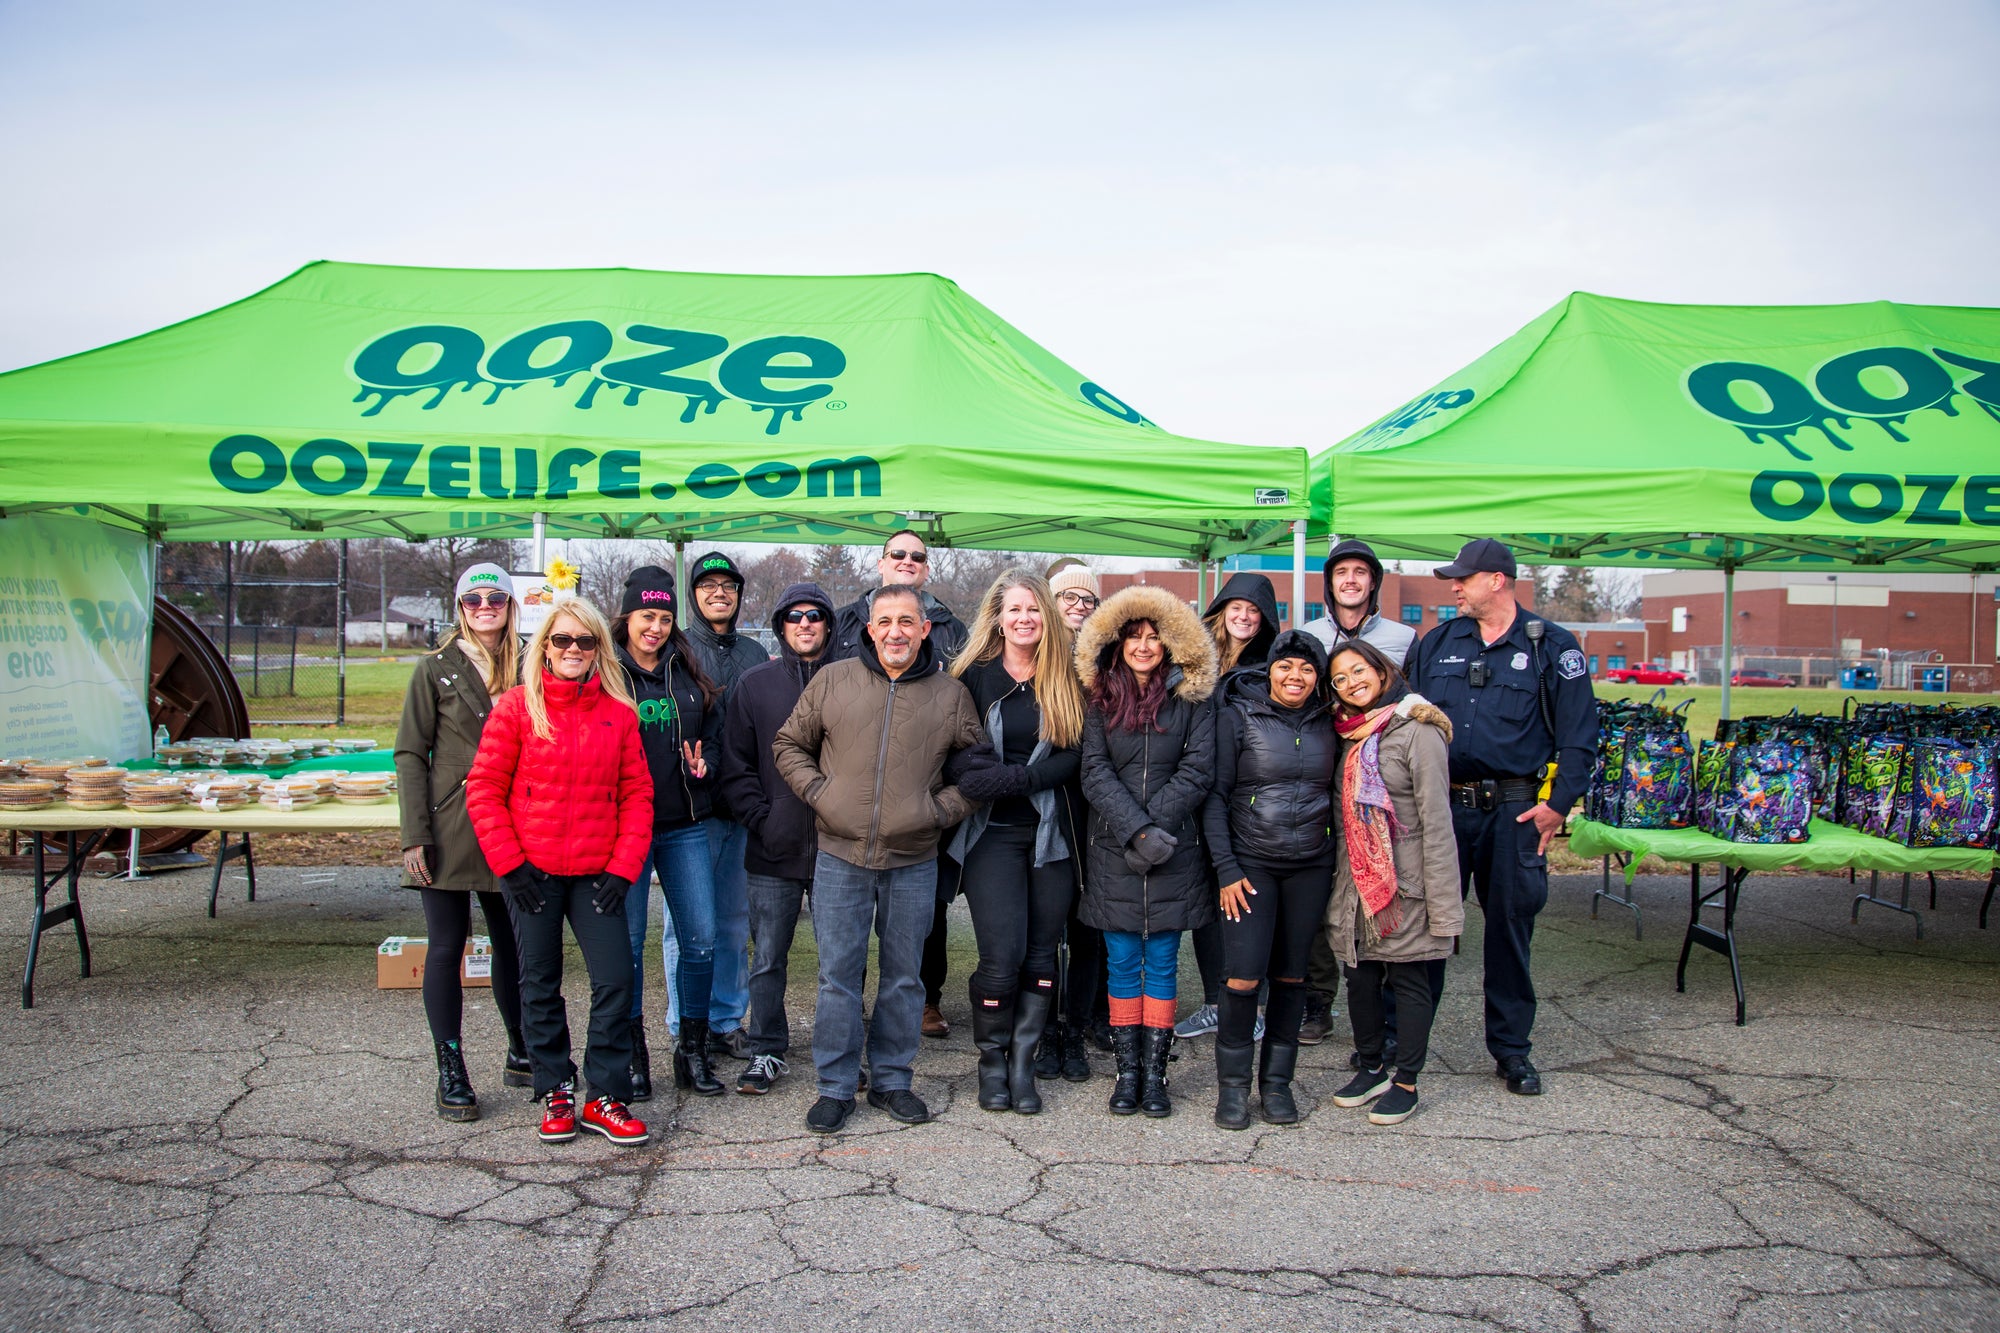 The Ooze Foundation team is posed for a group photo in front of the Ooze tents and tables full of food at the Oozegiving food drive event in Detroit.